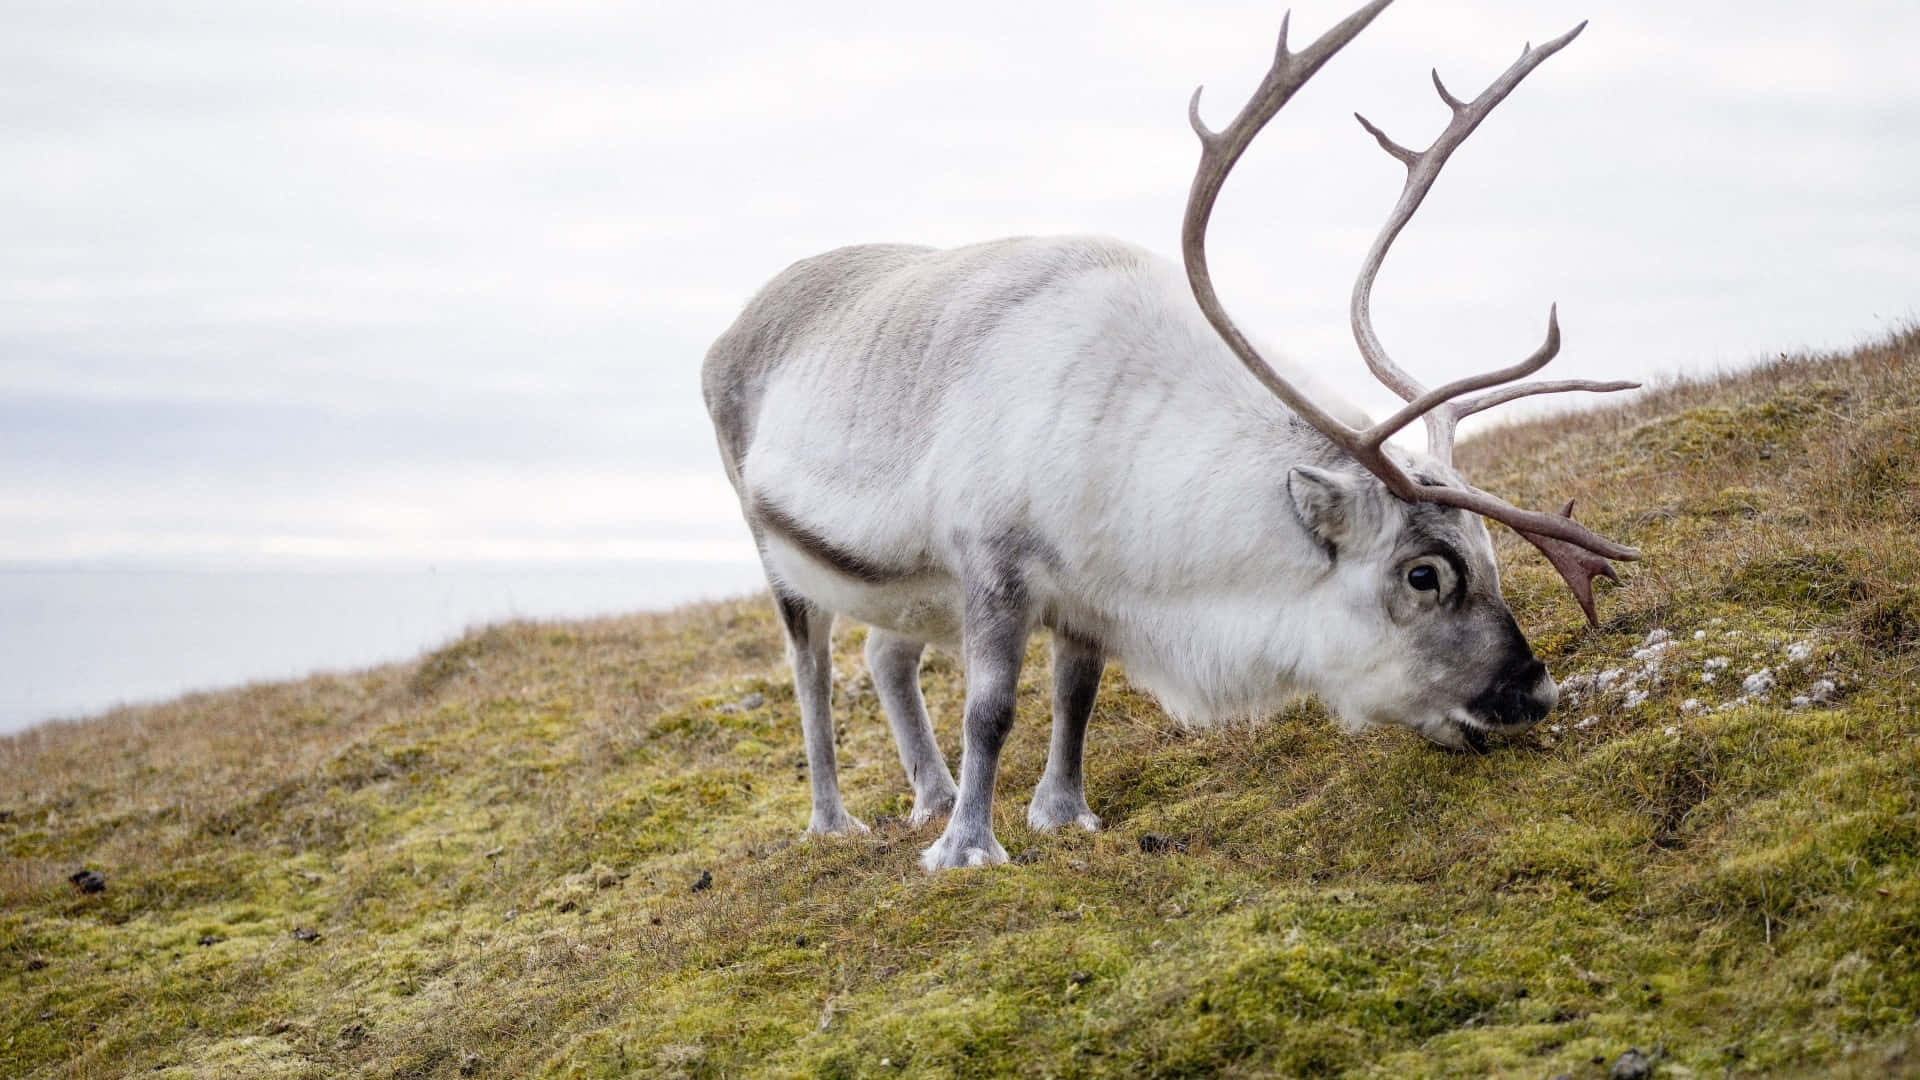 A reindeer grazing in a vibrant meadow.